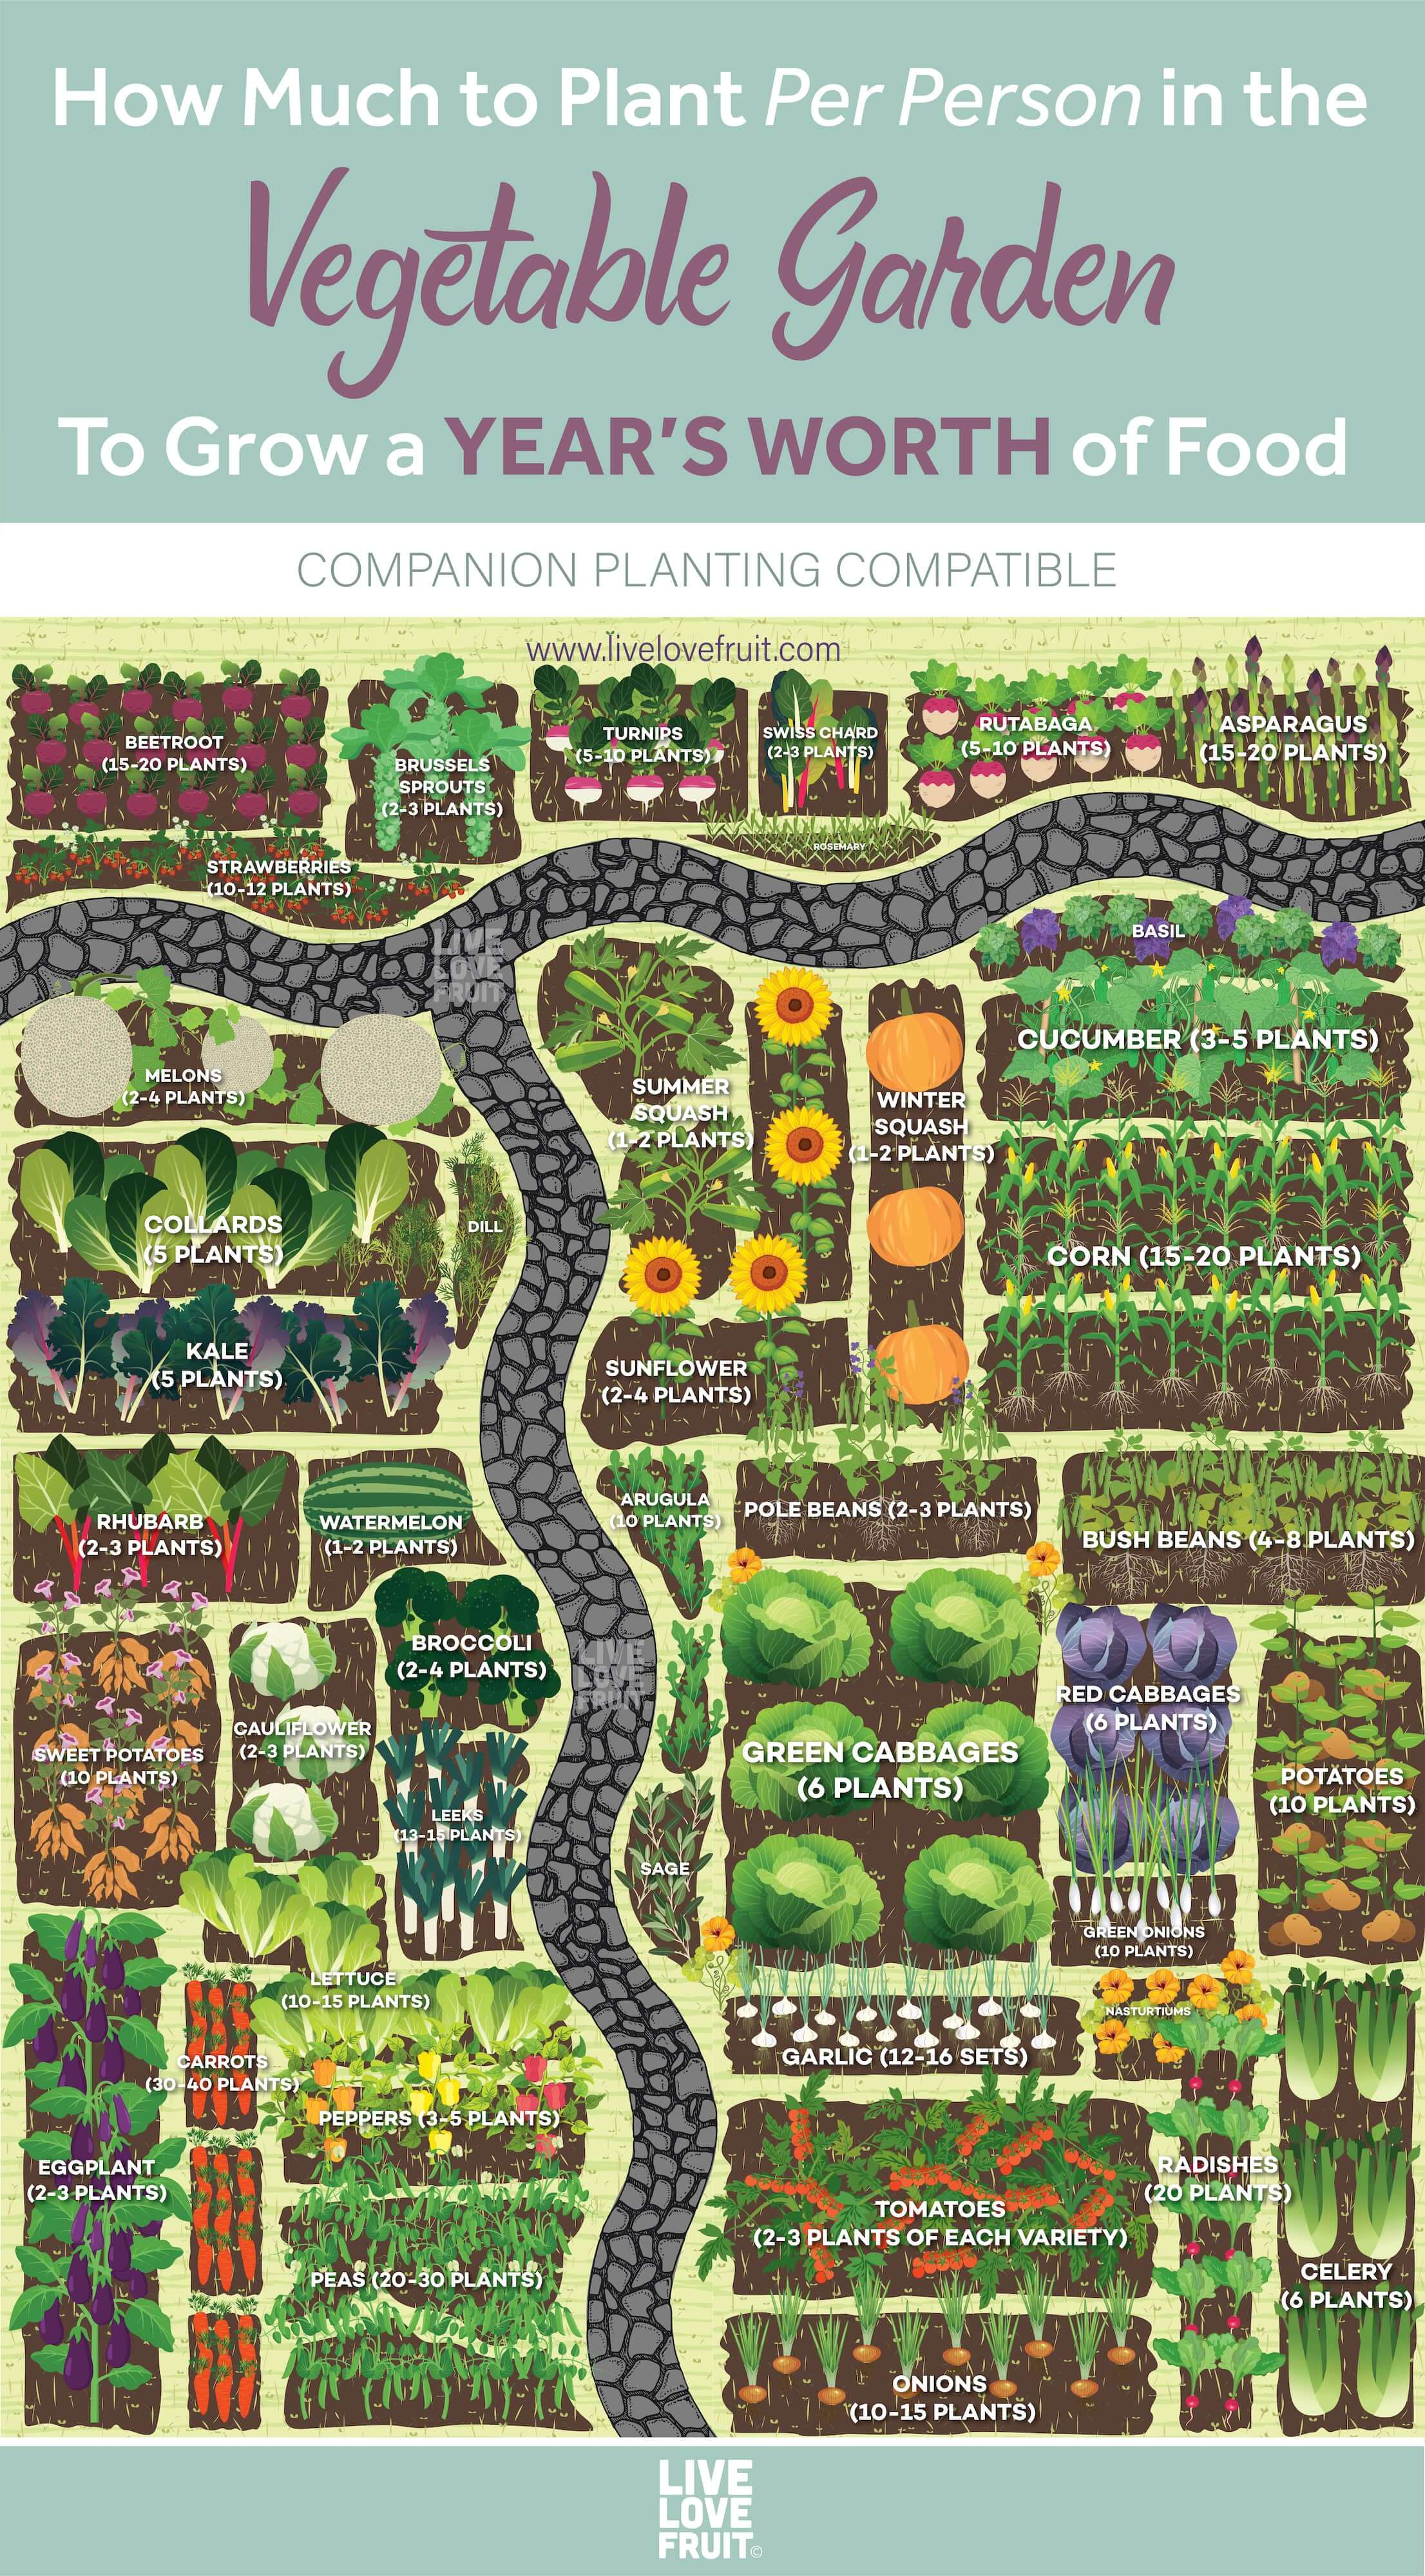 how much to plant per person in the vegetable garden to grow a years worth of food graphic chart